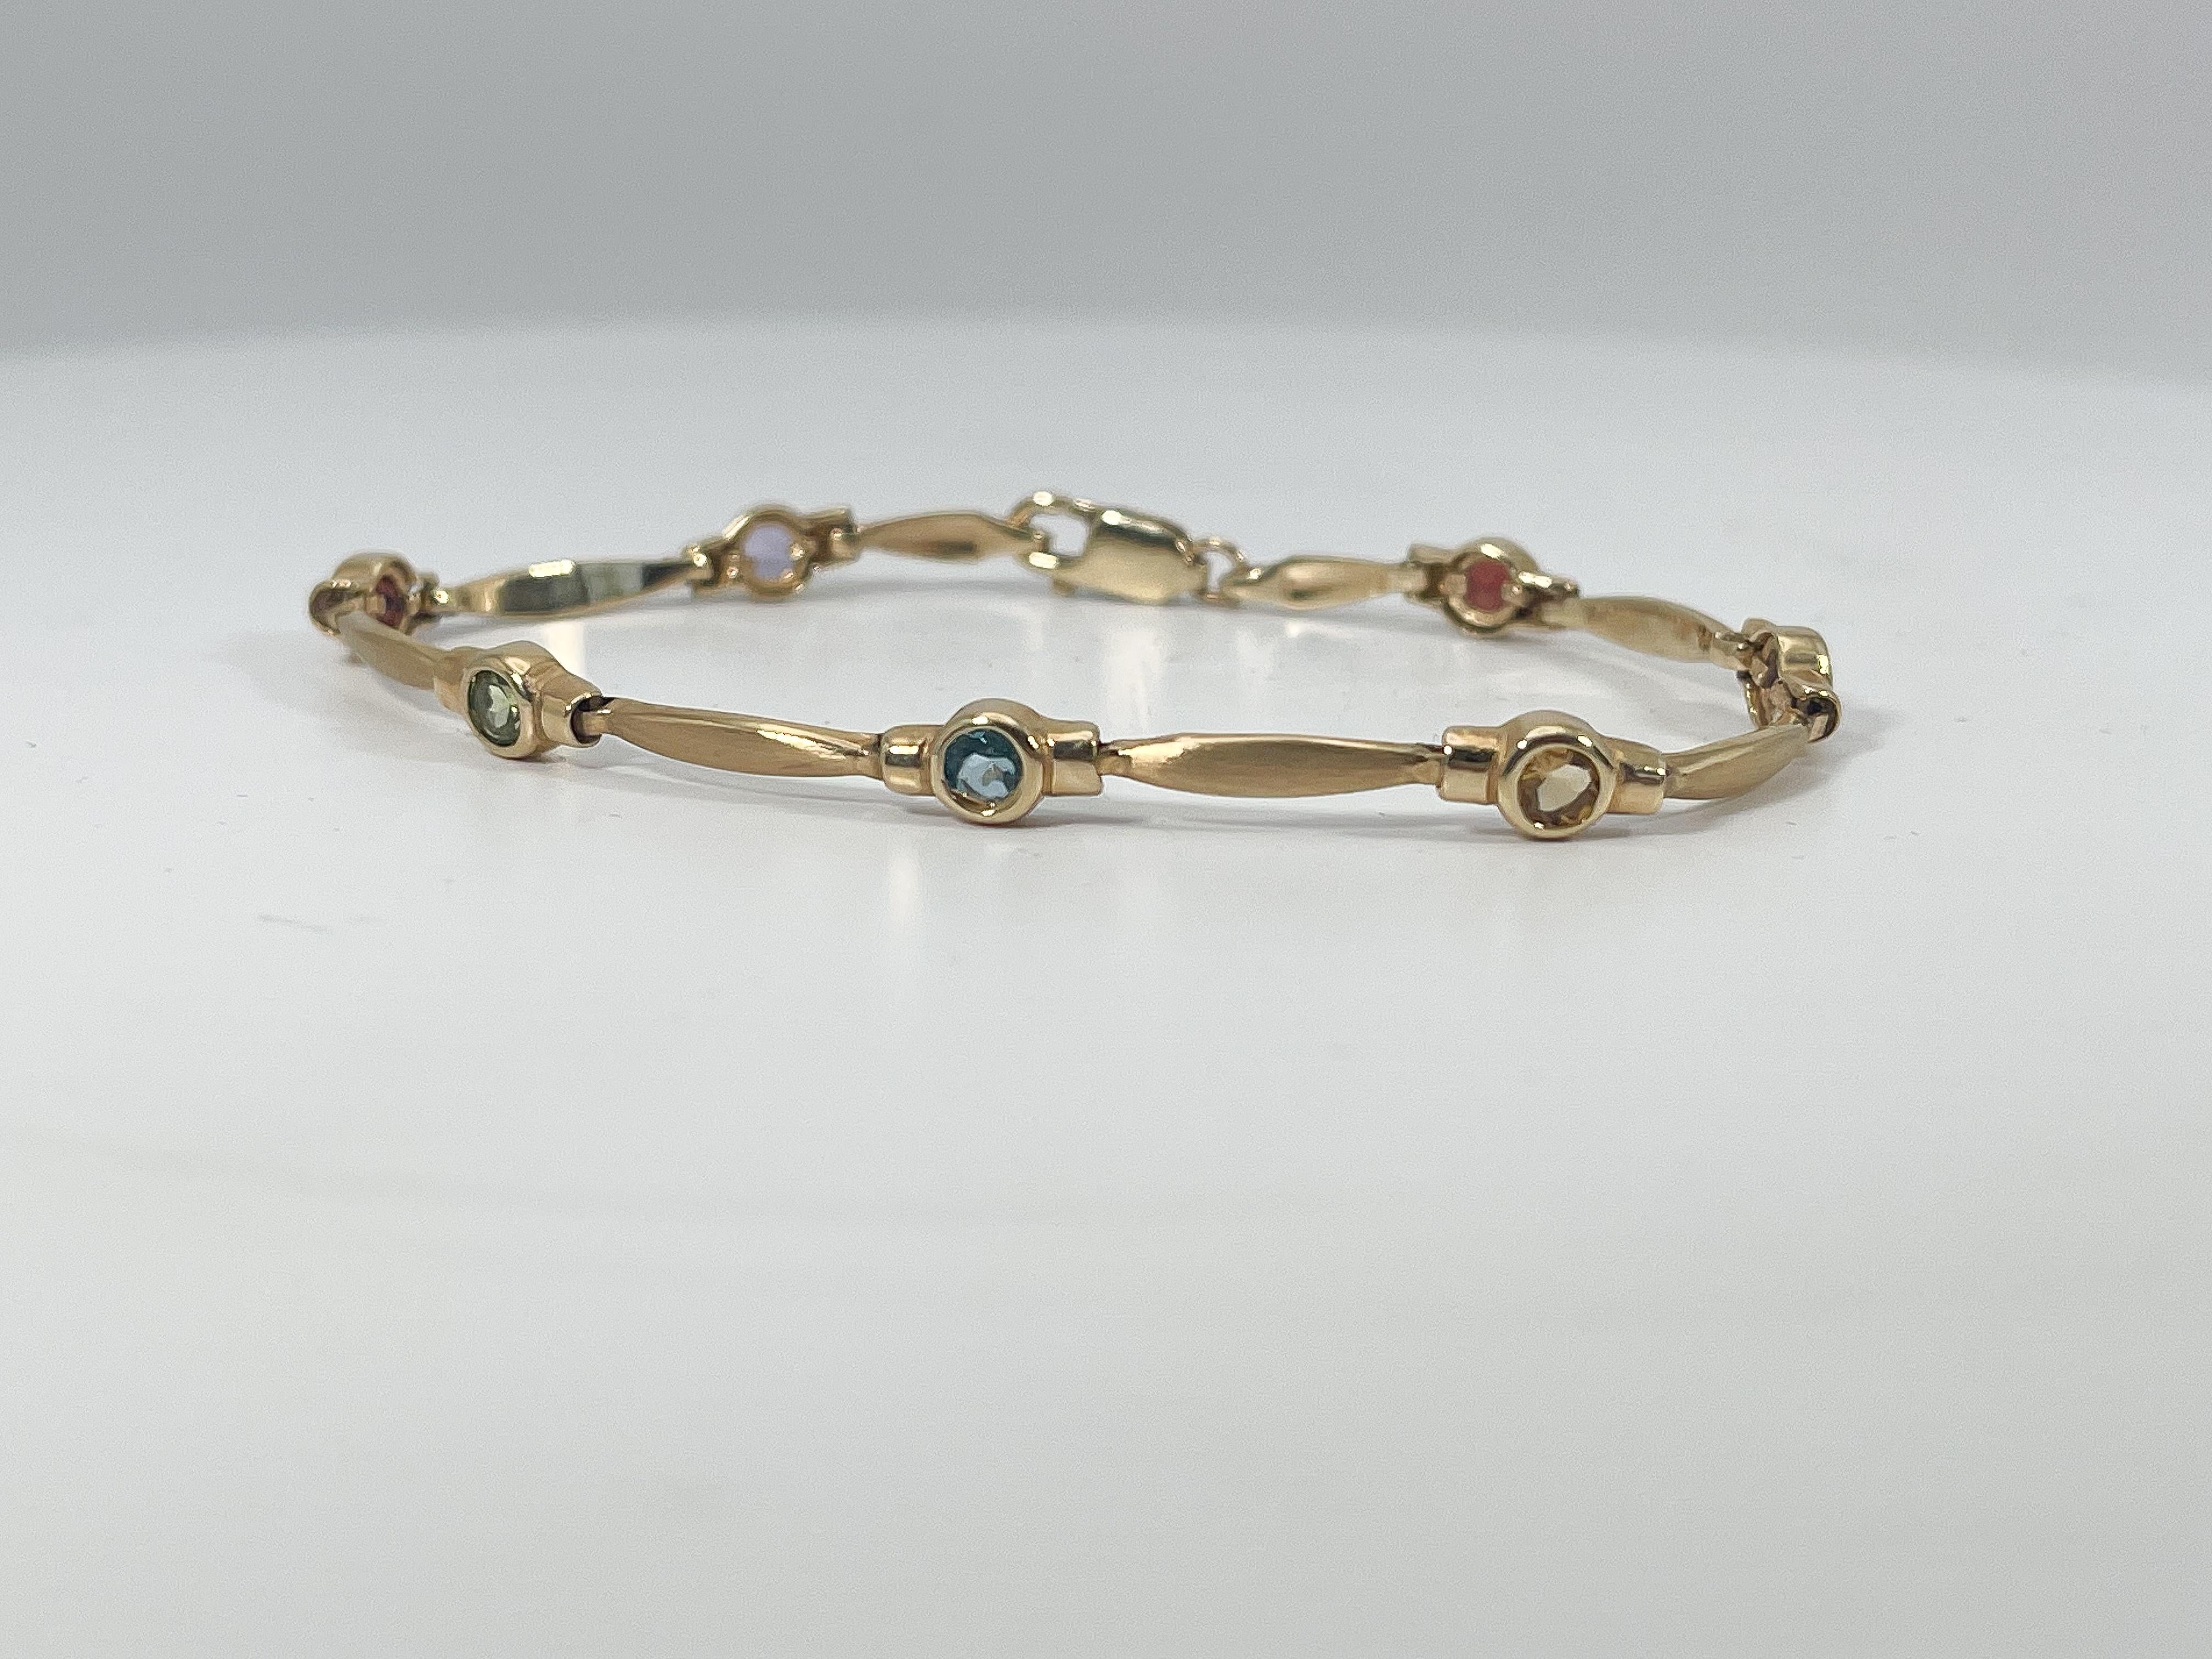 14k yellow gold round bezel set colored citrine bracelet. This bracelet has a lobster clasp, 7 stones, purple, red, green, blue, and yellow. The width of the bracelet is 5 mm, the length measures 7 inches, and has a total weight of 8.12 grams.